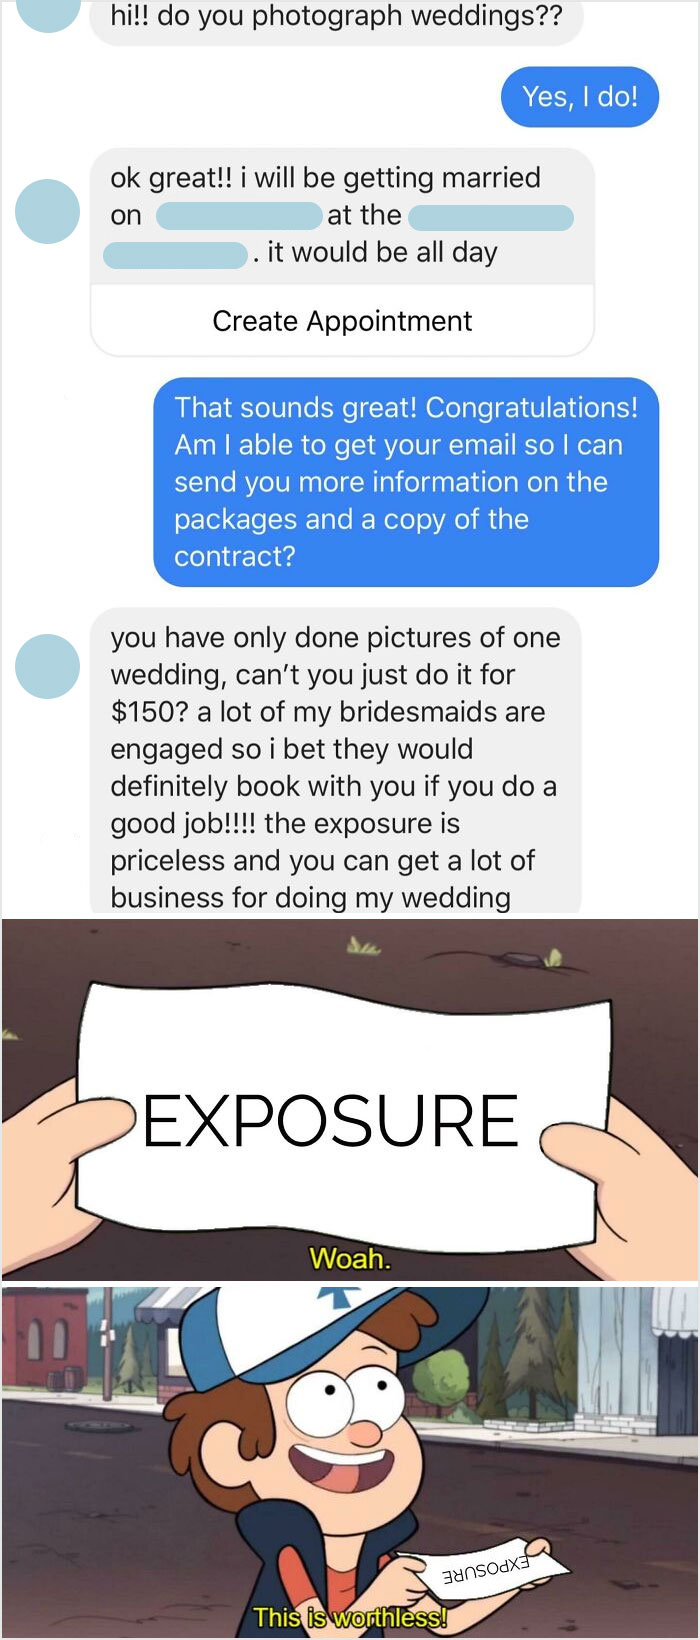 Woman Expects Me To Photograph Her Wedding For $150 But The Exposure Is Priceless